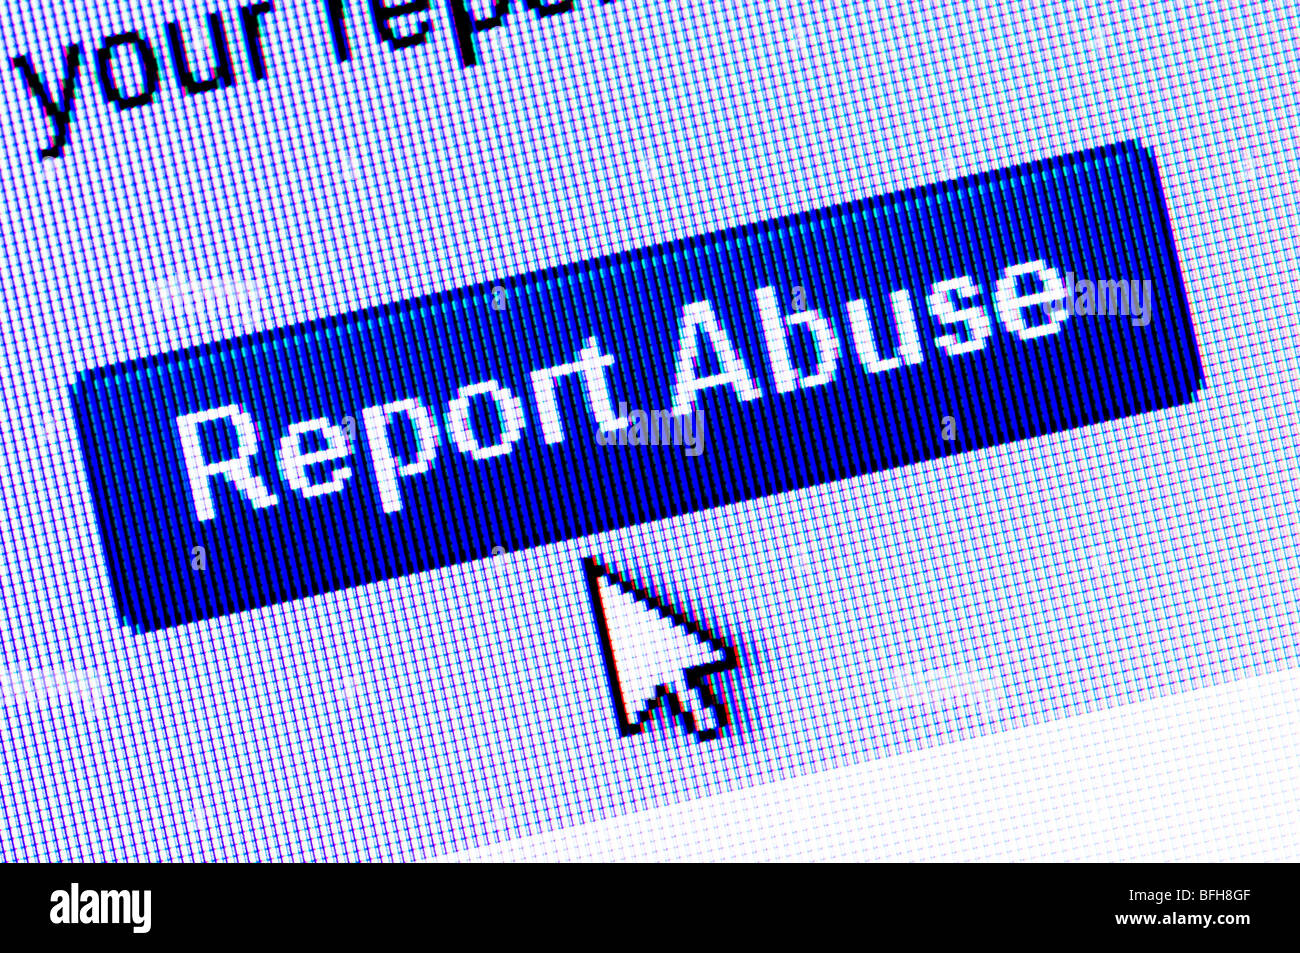 Macro screenshot of the Report Abuse icon on the Bebo social networking website - an initiative to stop online bullying. Stock Photo